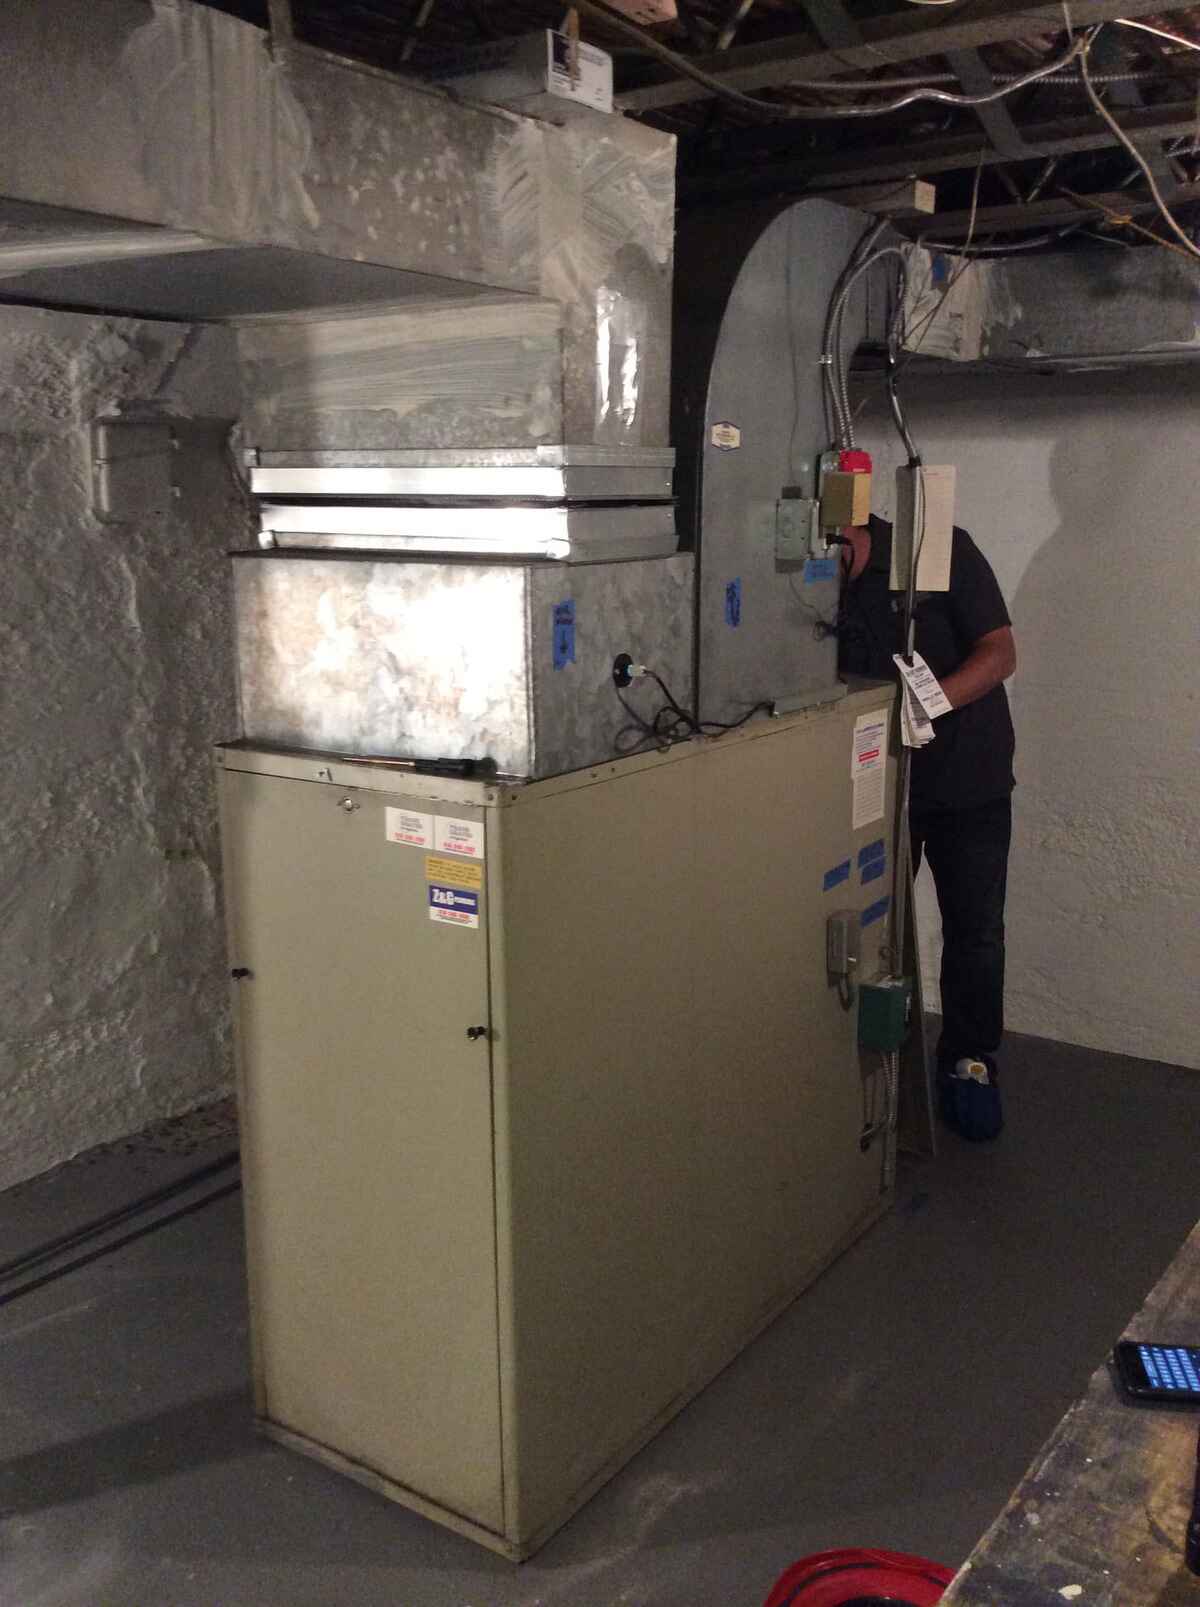 Old furnace in a basement